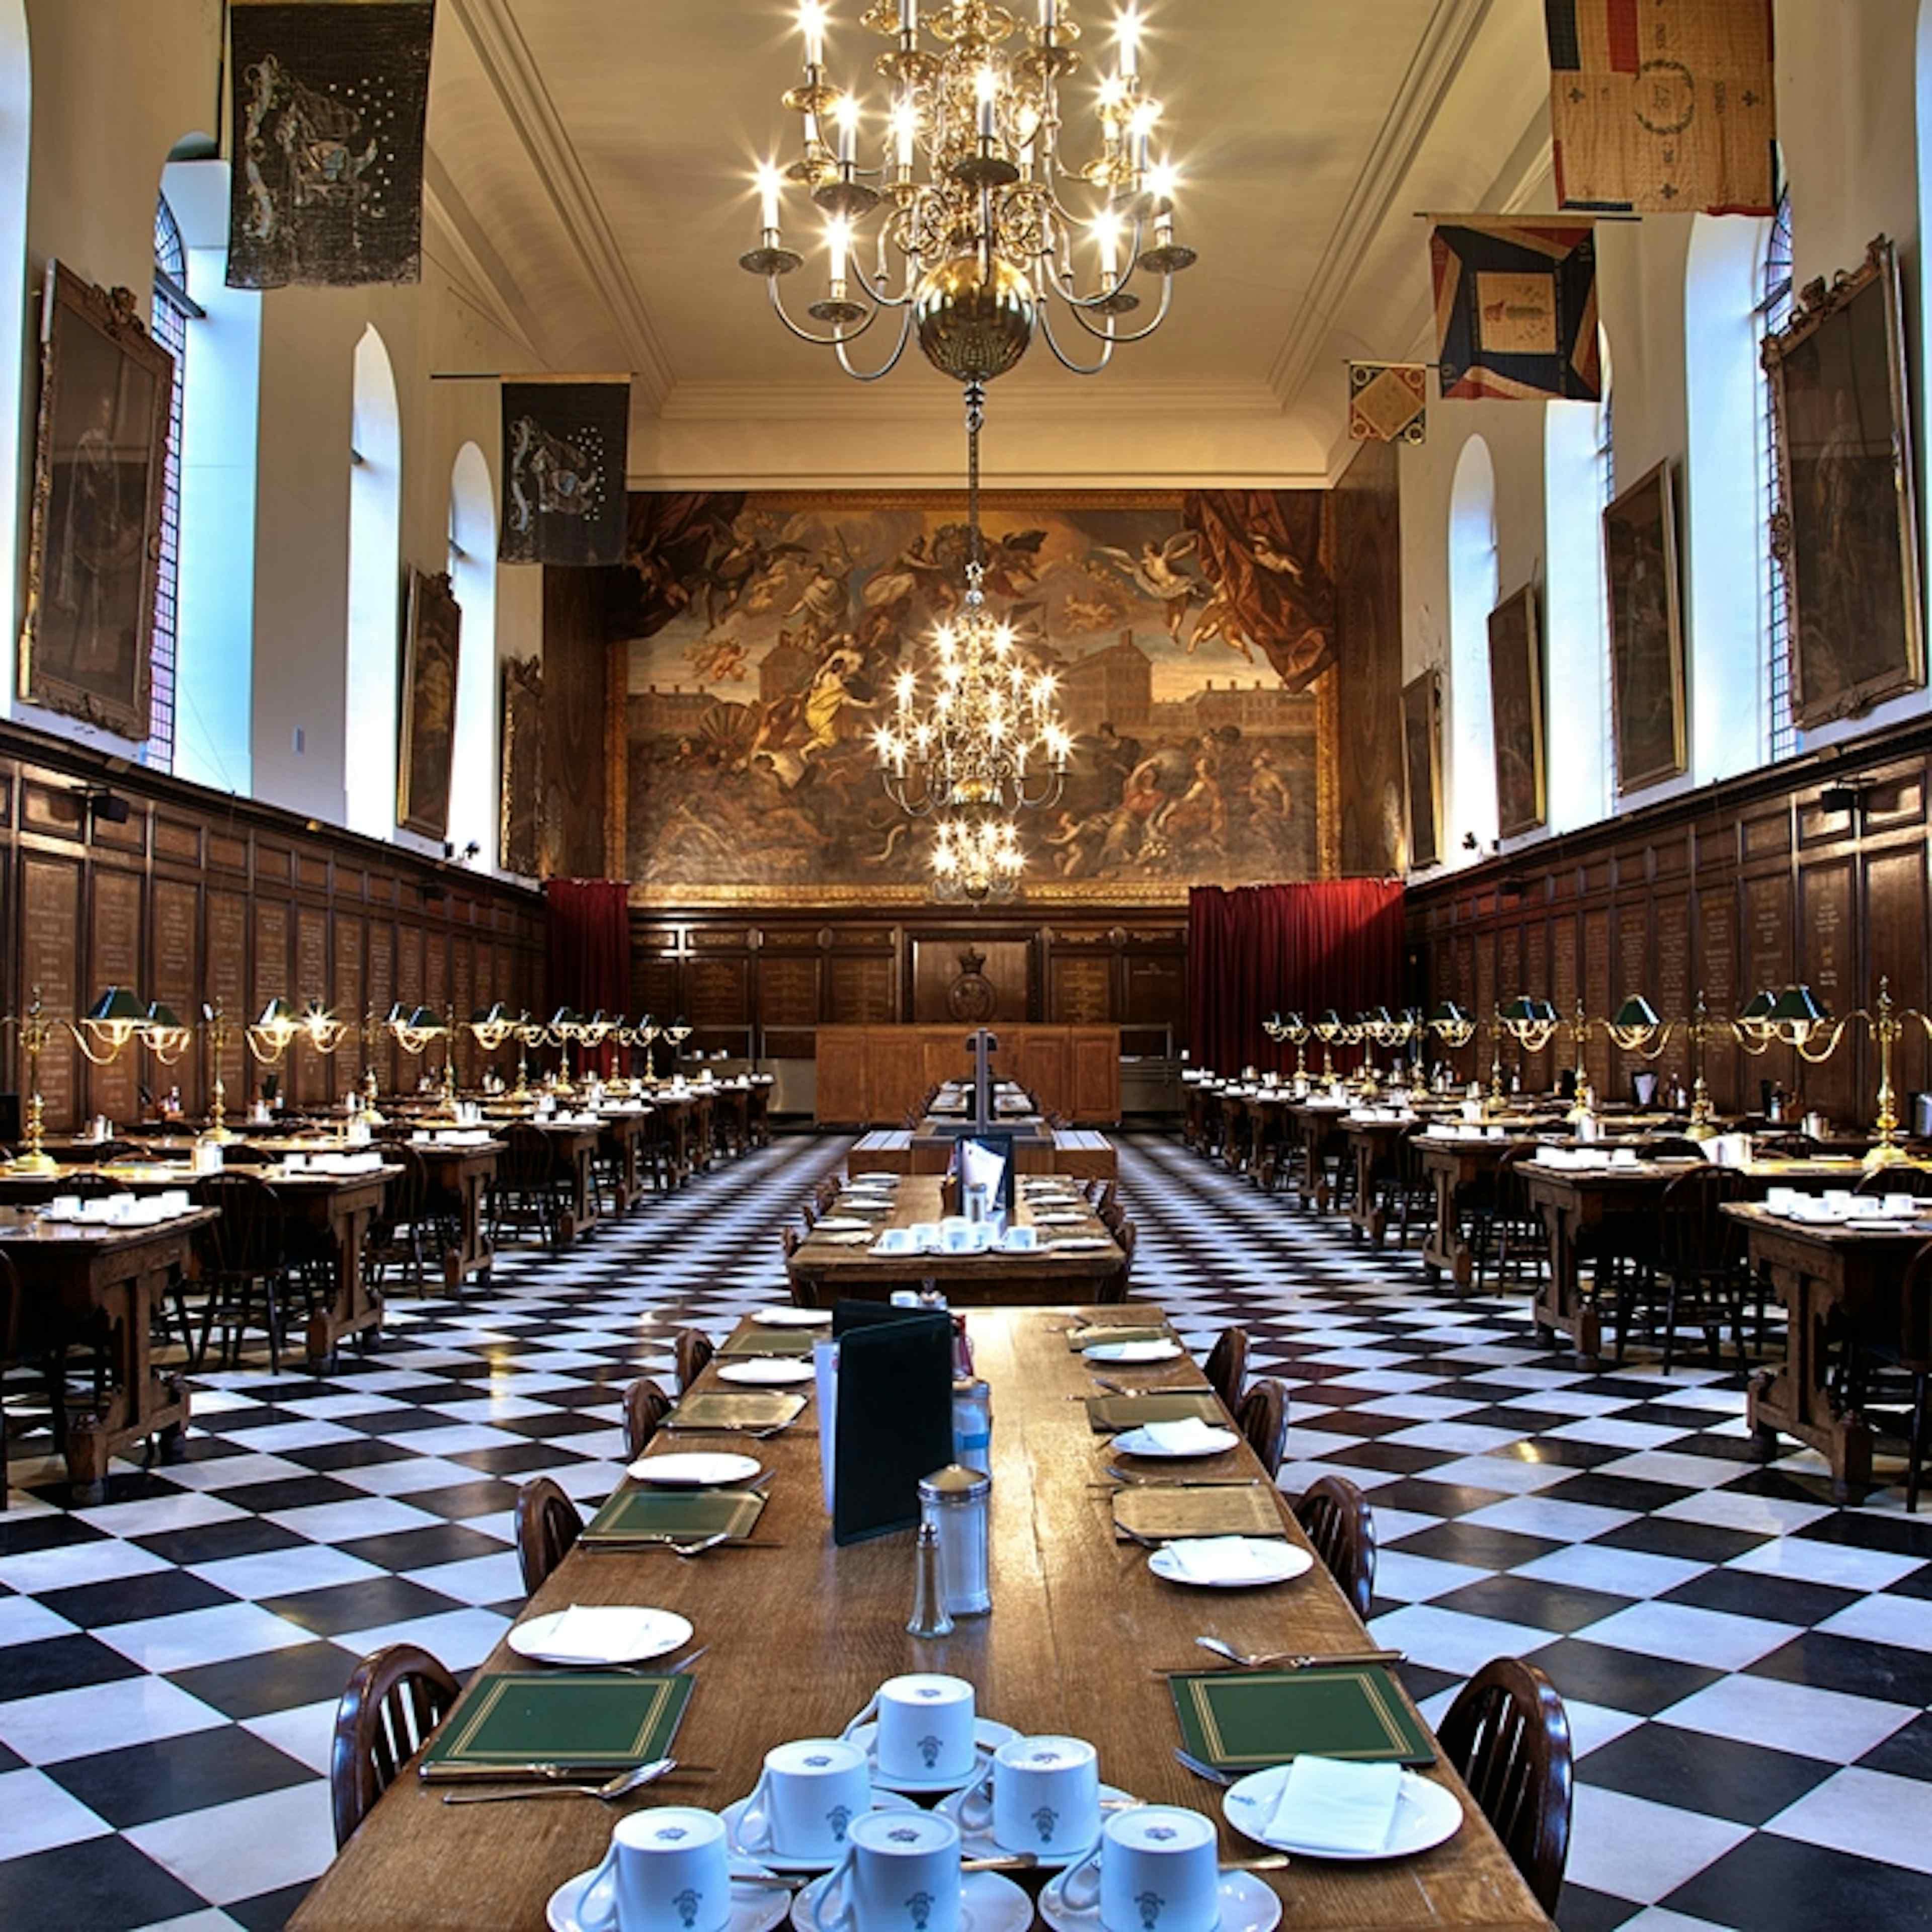 Royal Hospital Chelsea - The Great Hall image 3